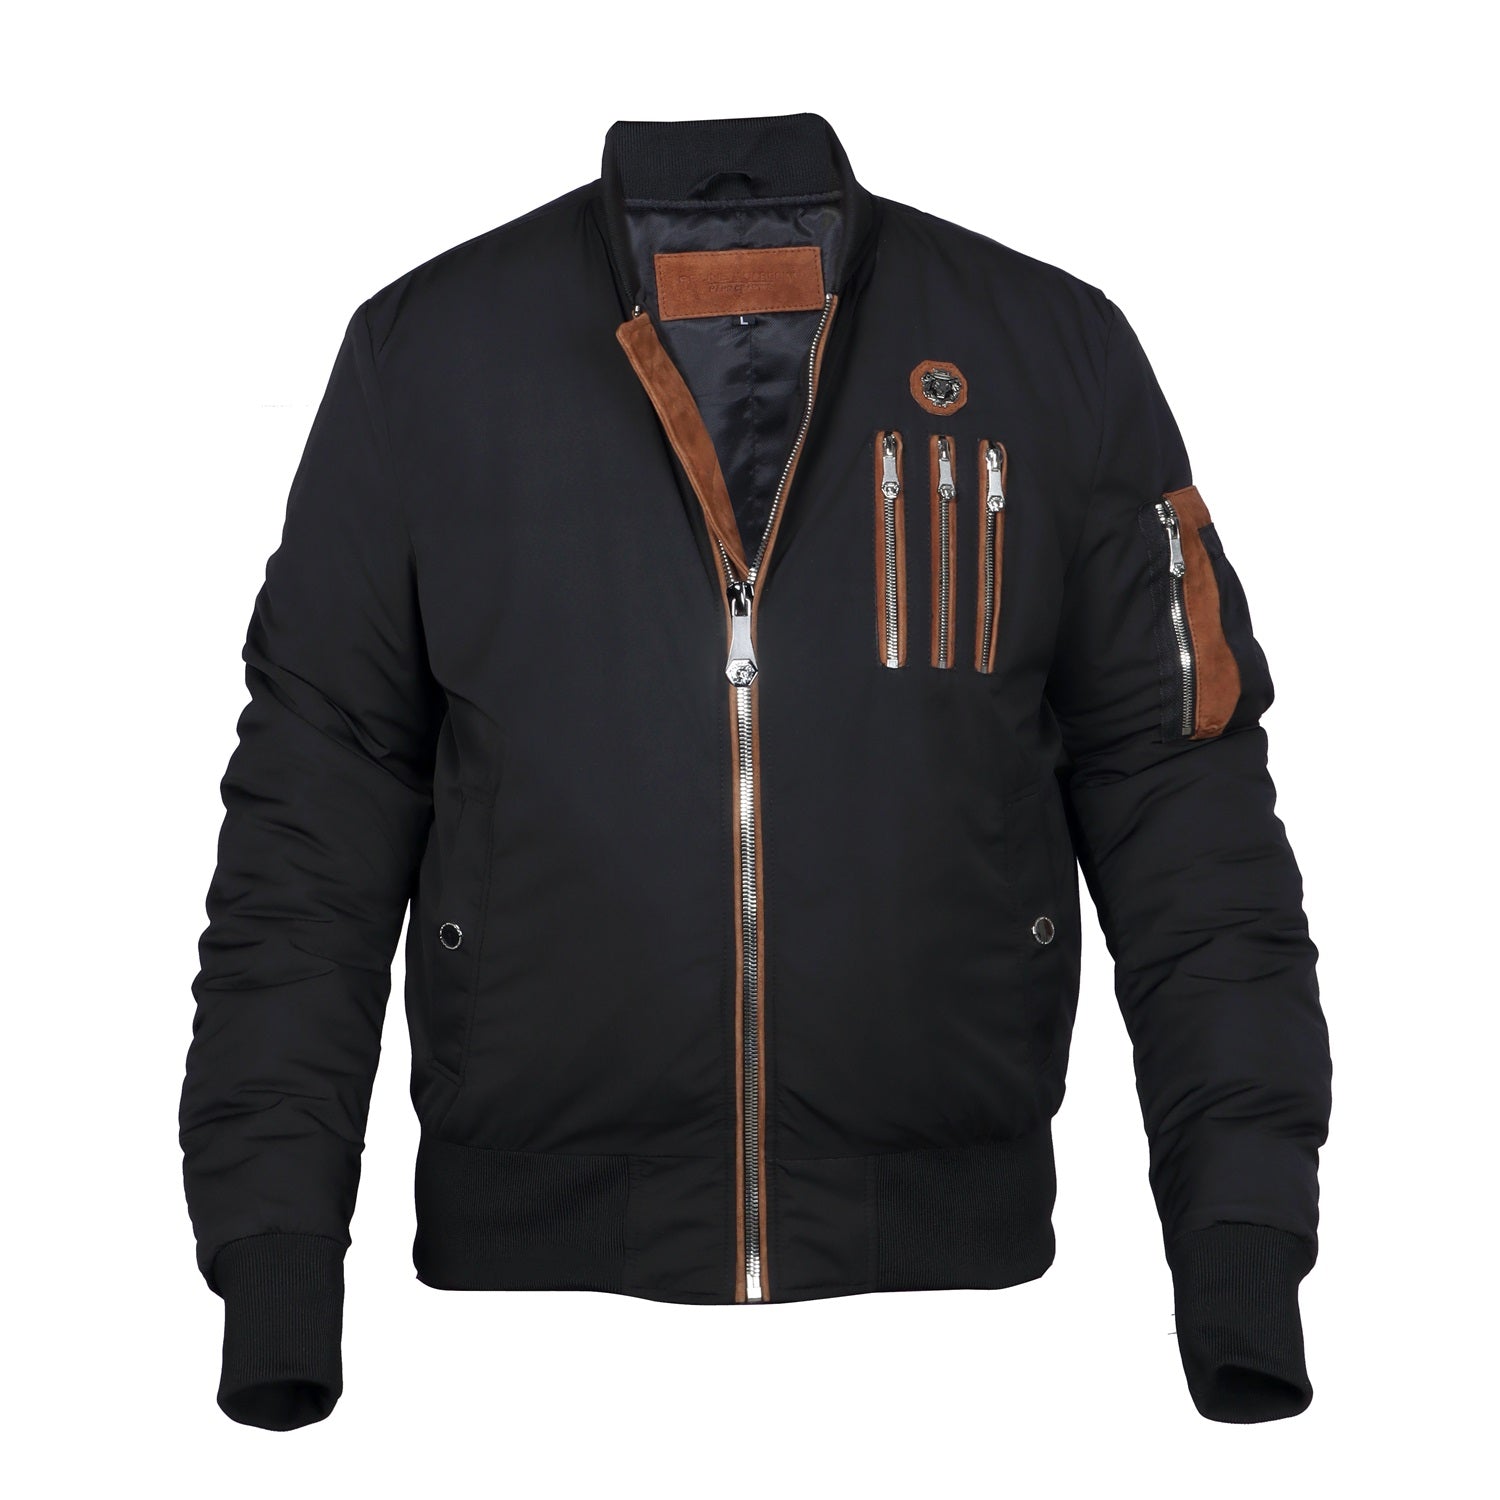 Black Contrasting Tan Puffer Bomber Jacket Tri-Zip Pockets with Standing Collar by Brune & Bareskin